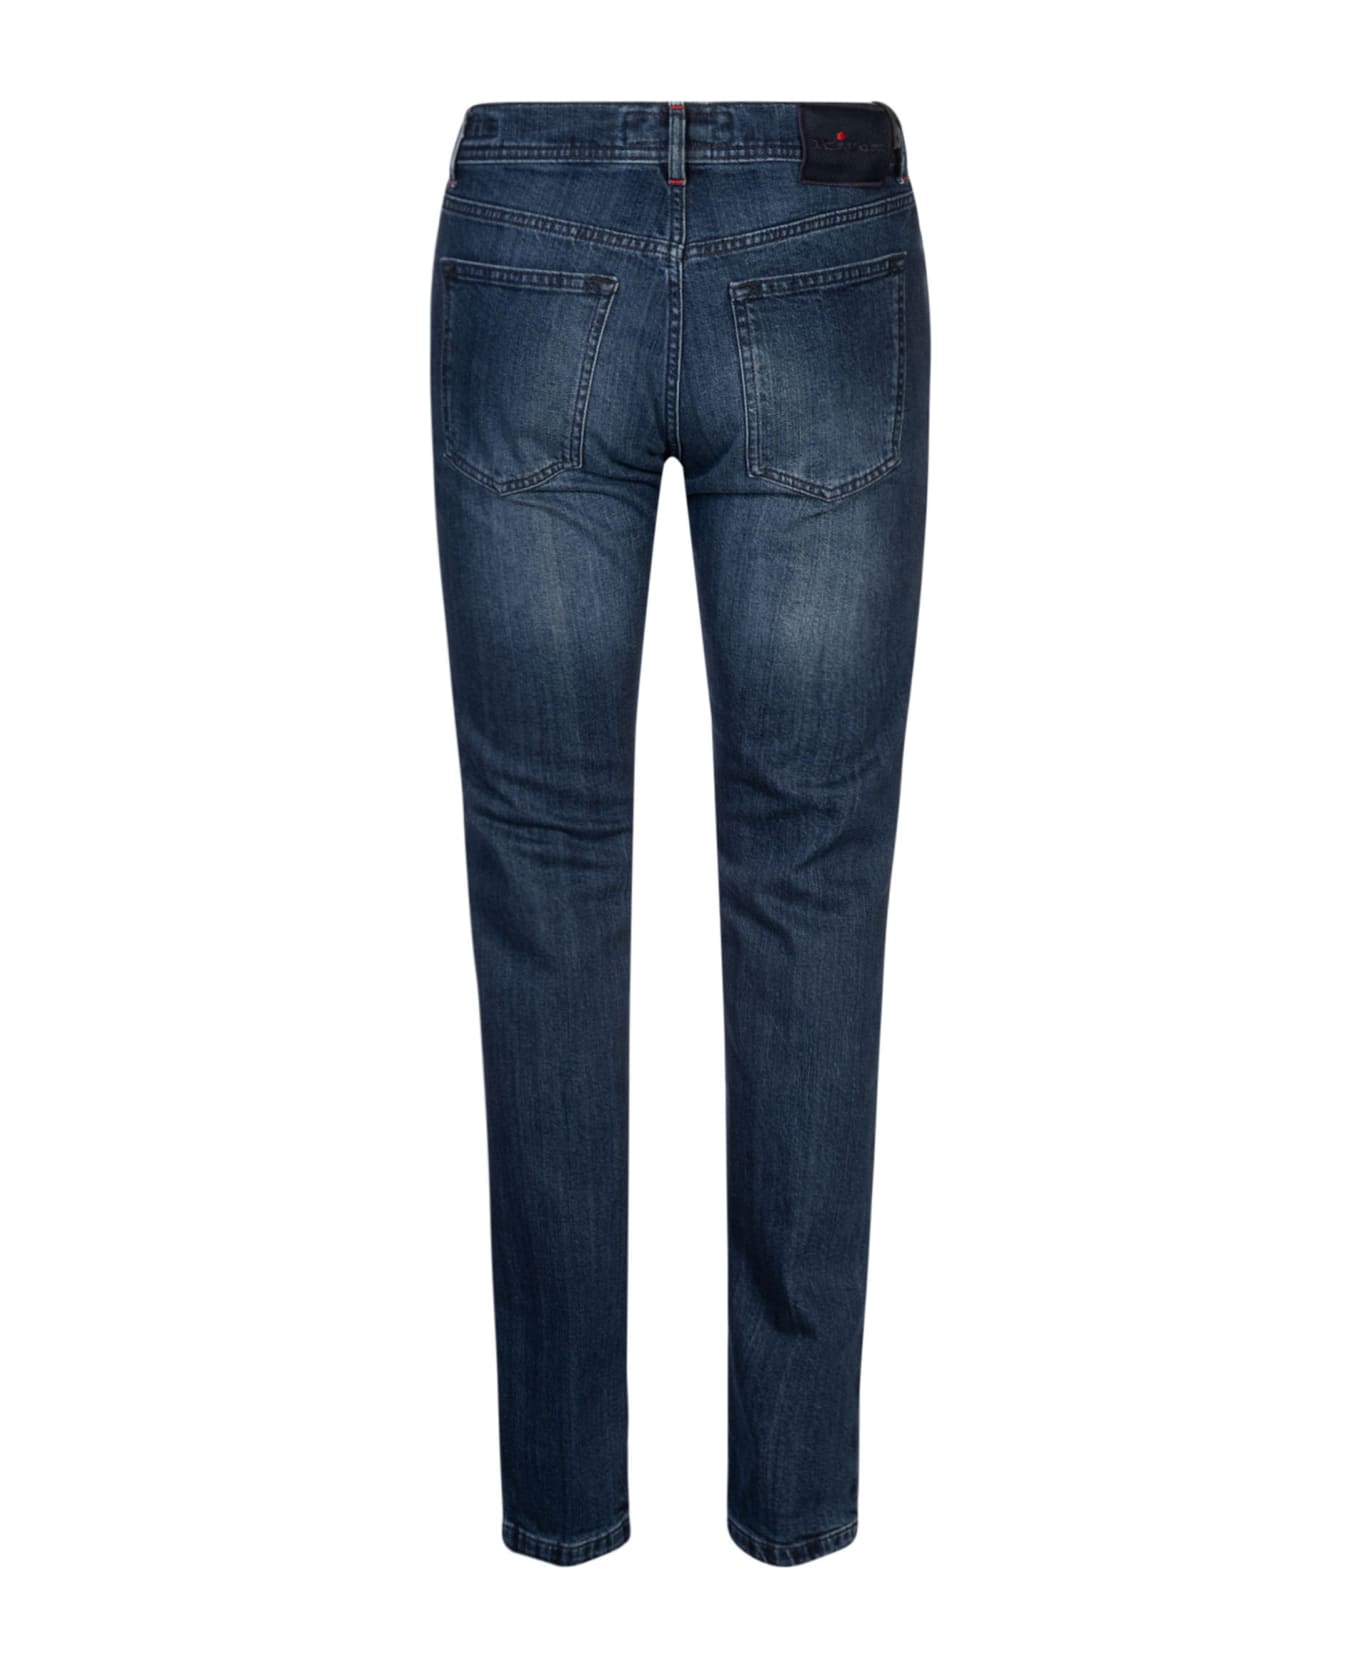 Kiton Fitted Buttoned Jeans - Lav Scuro